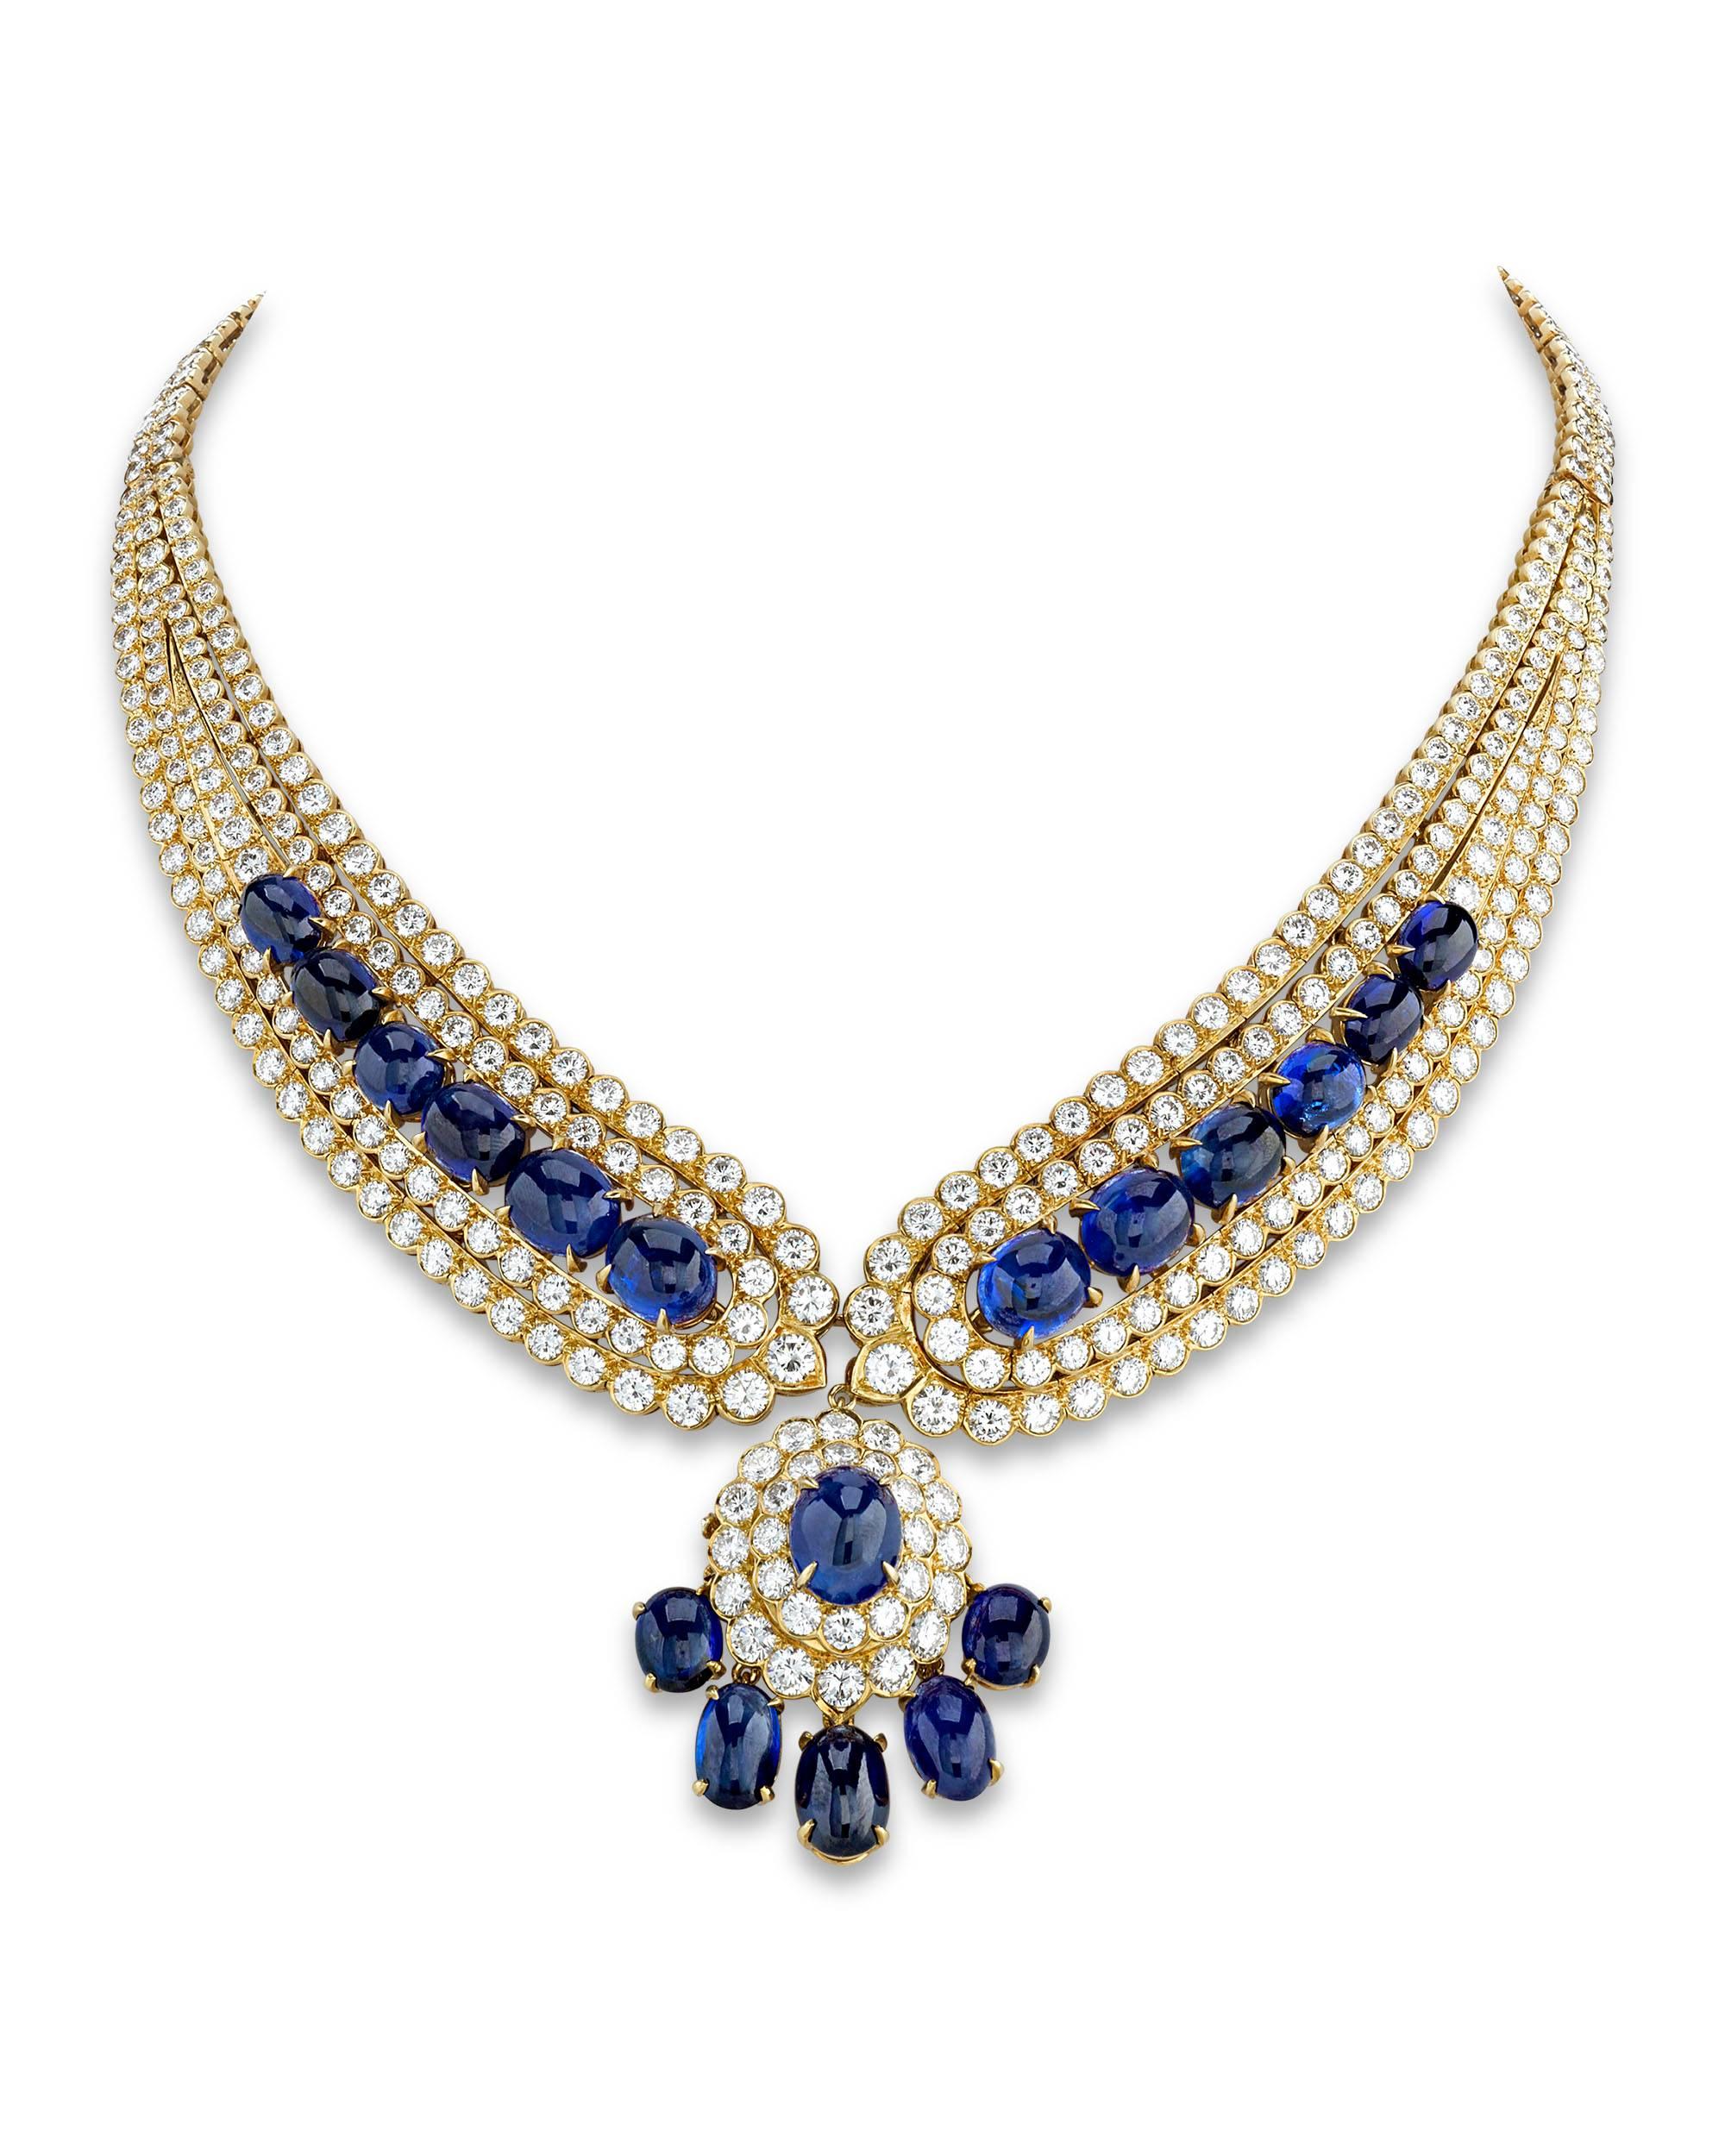 This captivating Van Cleef & Arpels necklace and earring suite don approximately 92.40 carats of deep blue cabochon sapphires. The vibrant jewels are joined by approximately 44.25 carats of glistening white diamonds. Signed. 18K gold.

16” length 